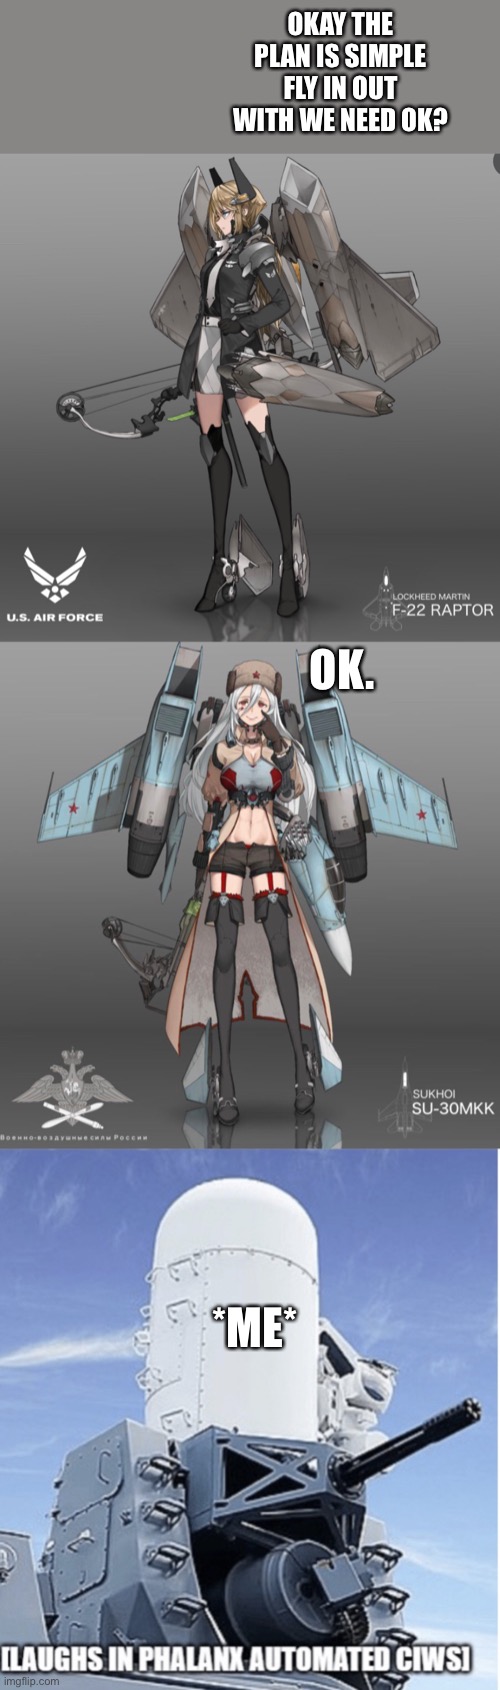 OKAY THE PLAN IS SIMPLE FLY IN OUT WITH WE NEED OK? OK. *ME* | image tagged in laughs in ciws | made w/ Imgflip meme maker